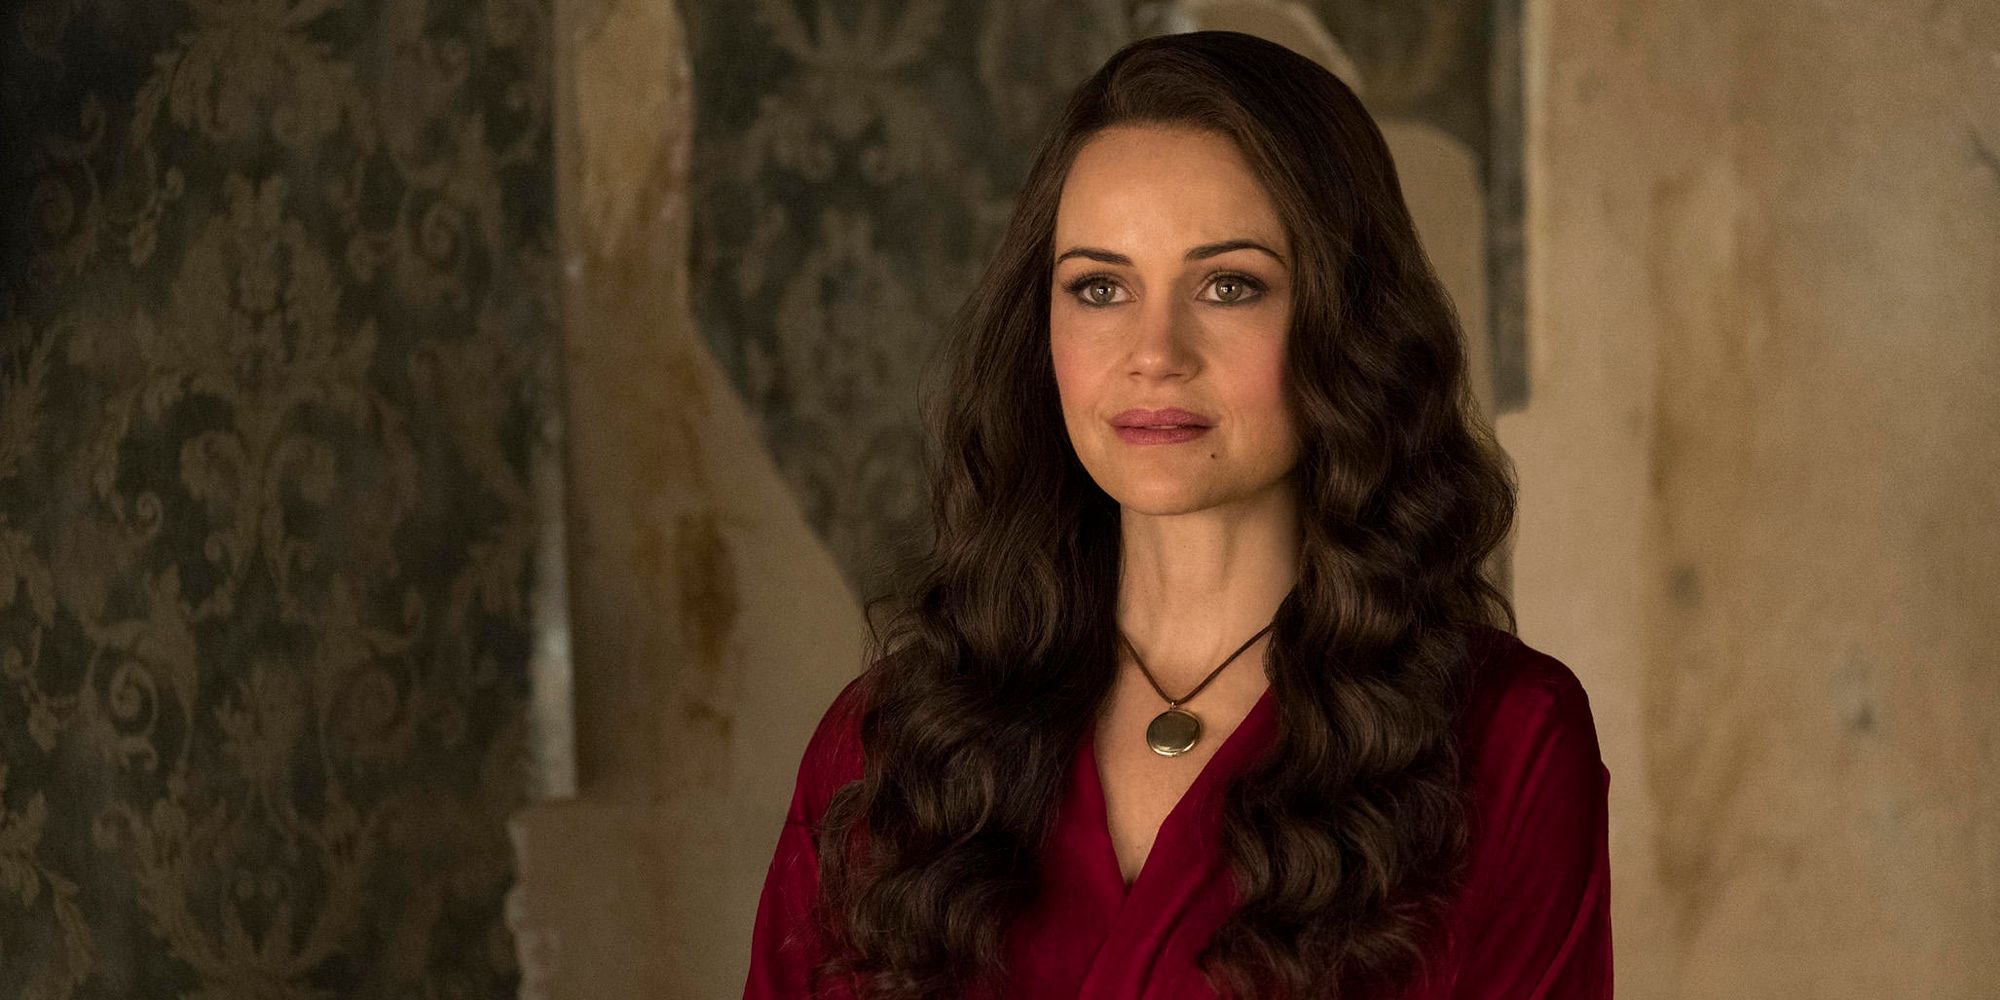 Olivia Crain smiling in The Haunting of Hill House